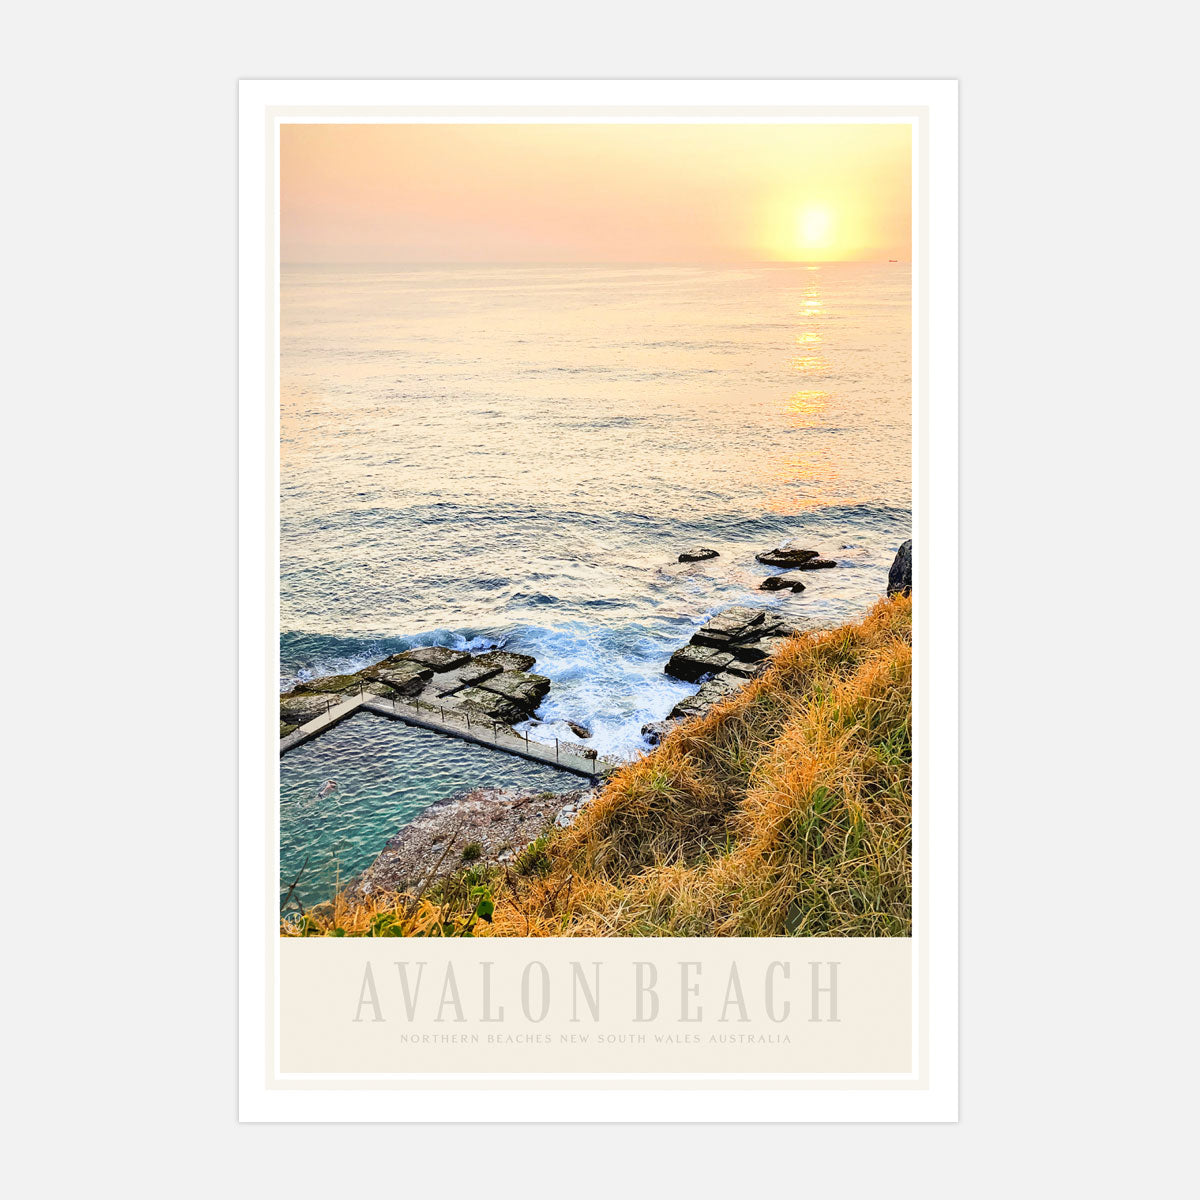 Avalon Beach vintage retro travel poster by Places We Luv